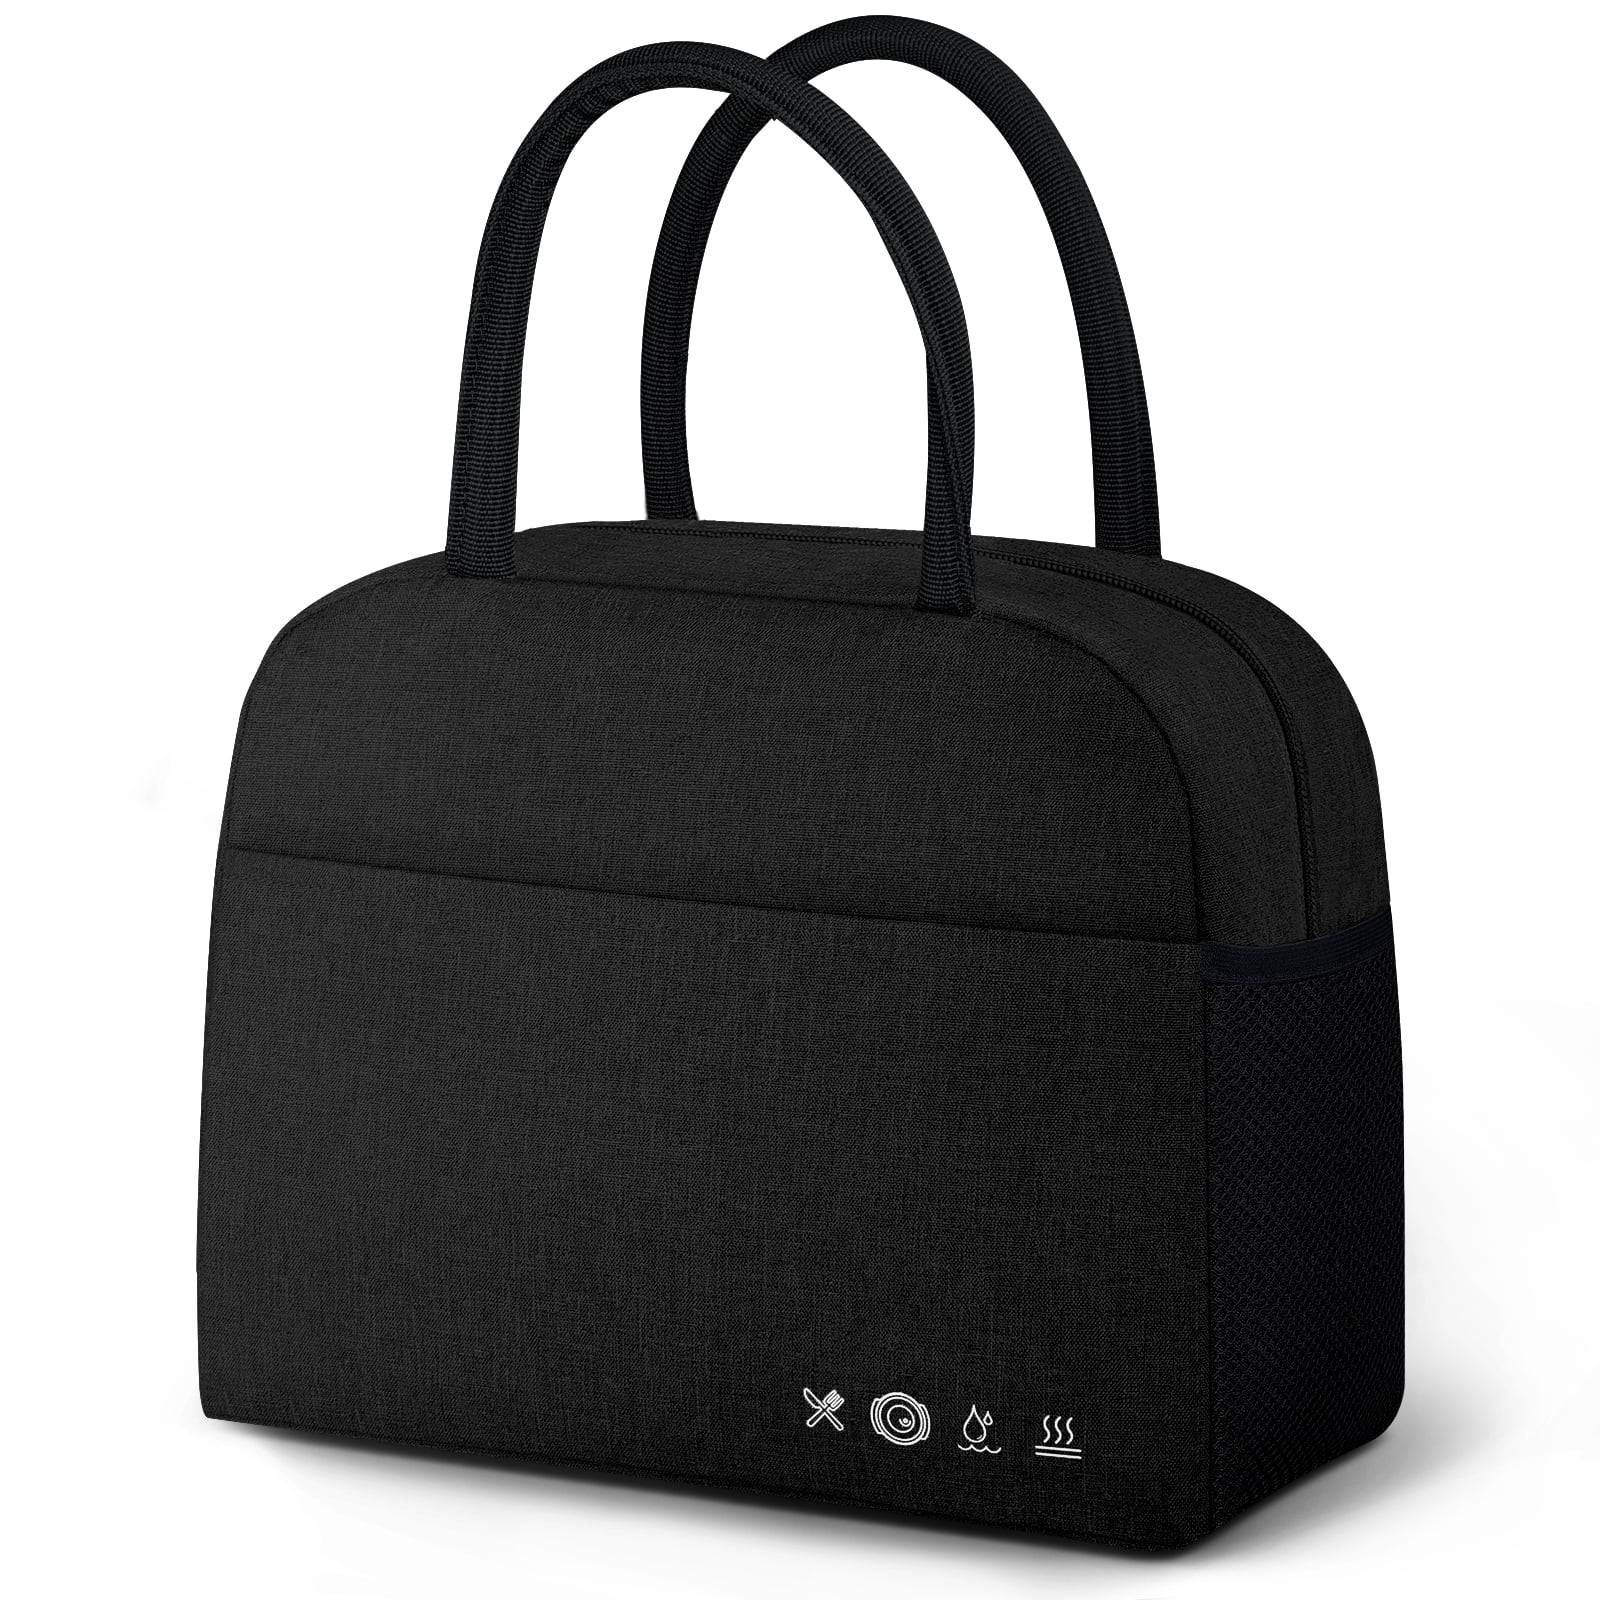 MOLYKA Lunch Bag - Insulated Lunch Box Durable Reusable Lunch Bag Adult Tote Bag for Men, Adults, Women (Black)